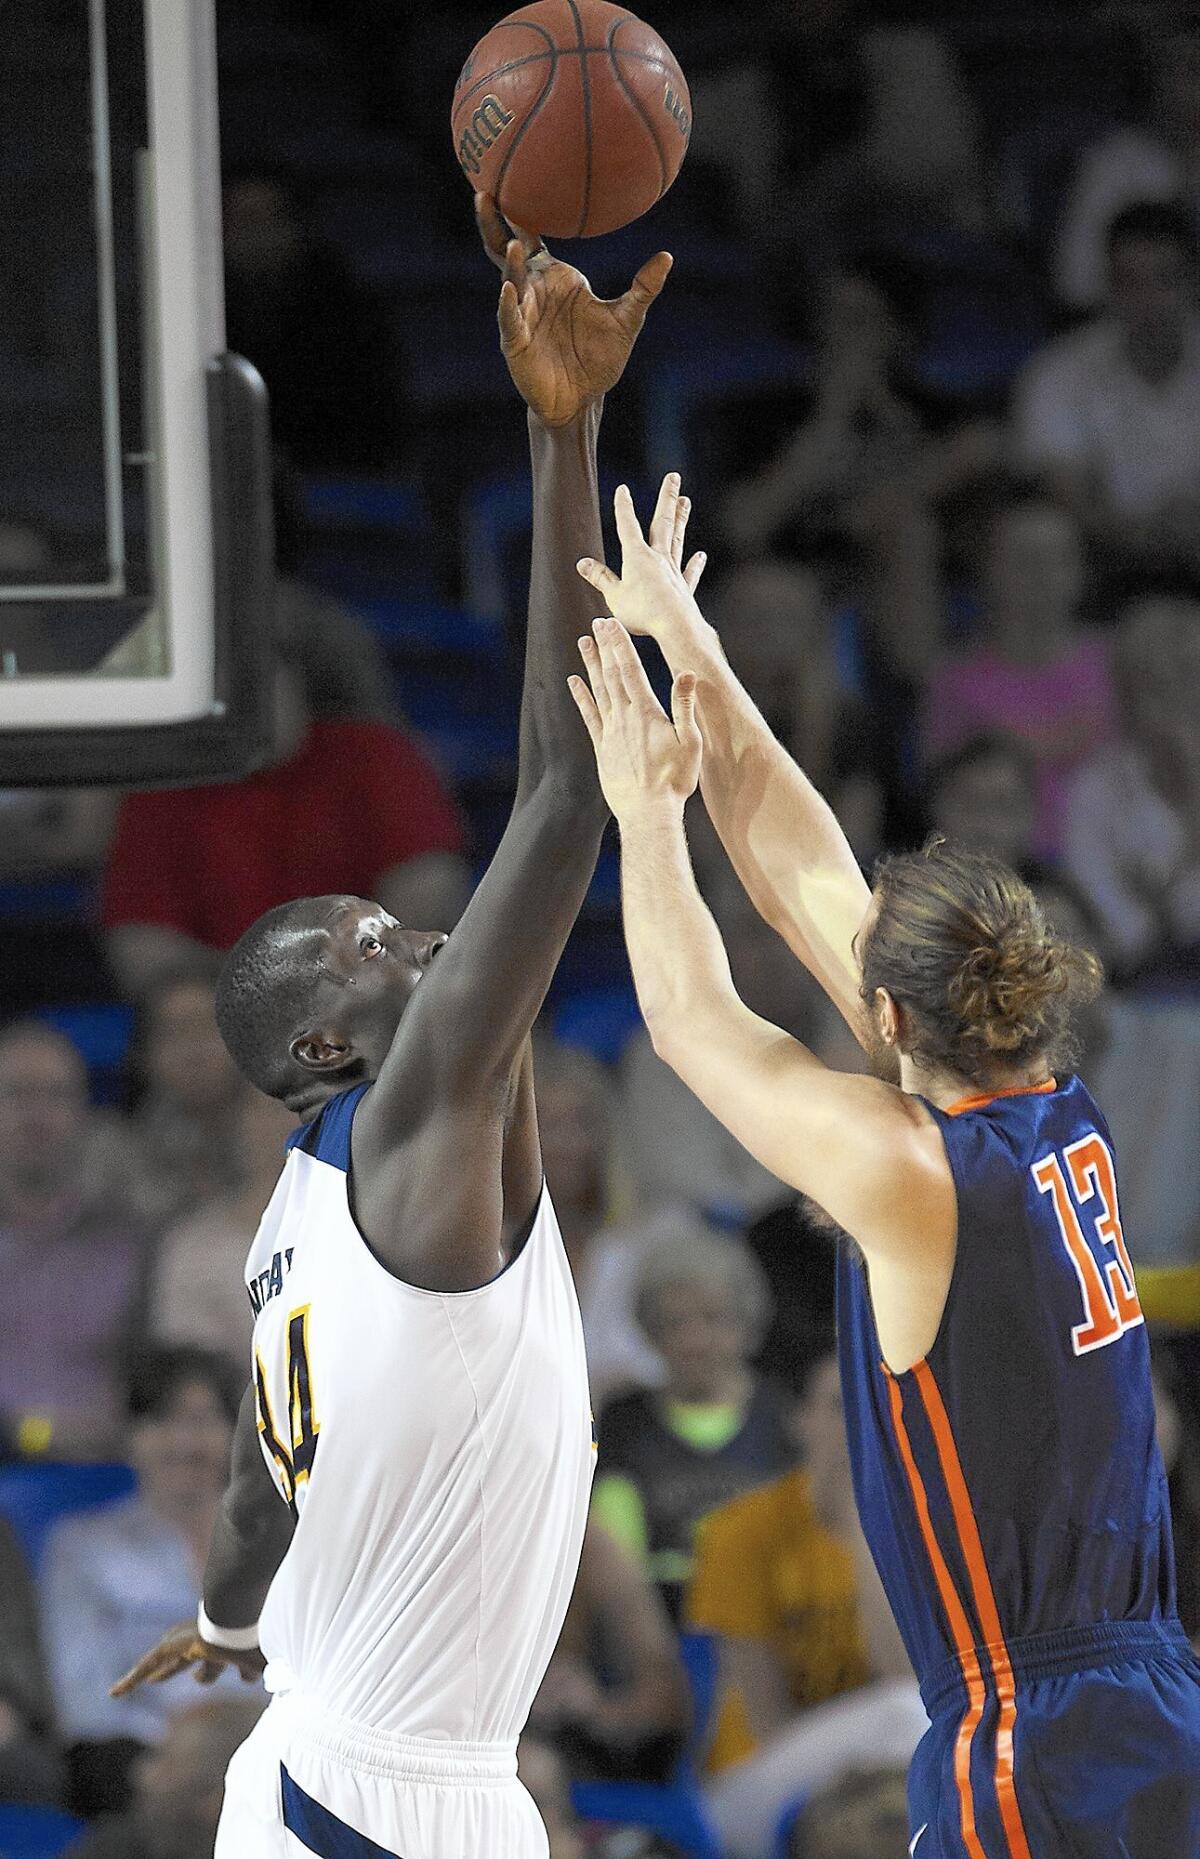 UC Irvine's Mamadou Ndiaye, seen here blocking a shot against Cal State Fullerton last year, has helped the Anteaters hold Big West Conference teams to 57.2 points per game on their way to a 4-0 start in conference.